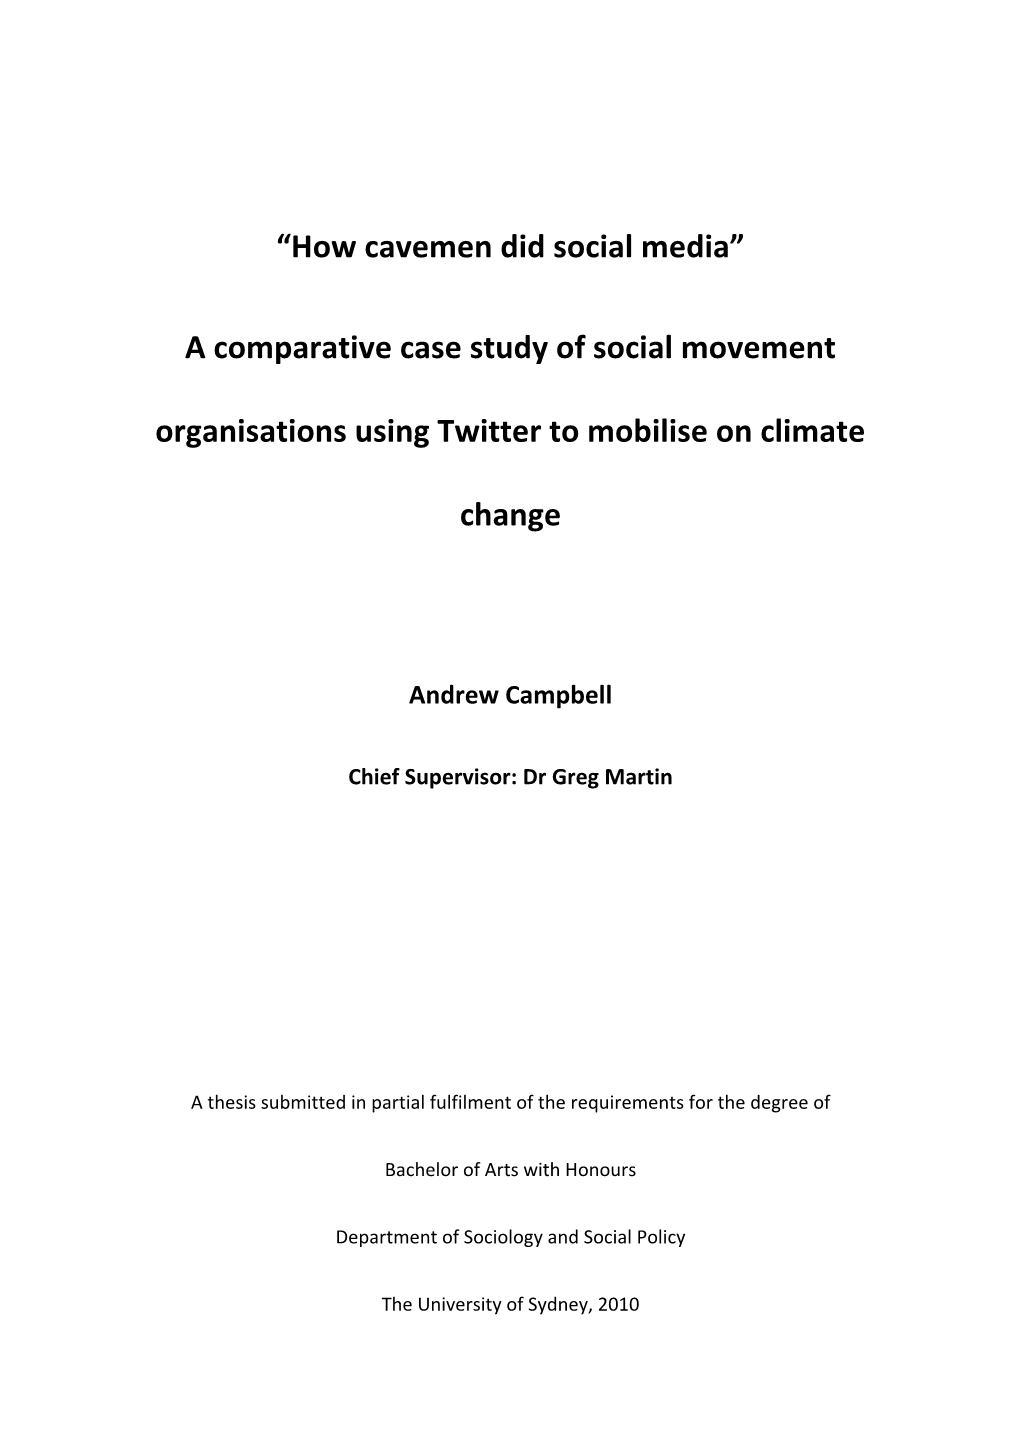 “How Cavemen Did Social Media” a Comparative Case Study of Social Movement Organisations Using Twitter to Mobilise on Climat